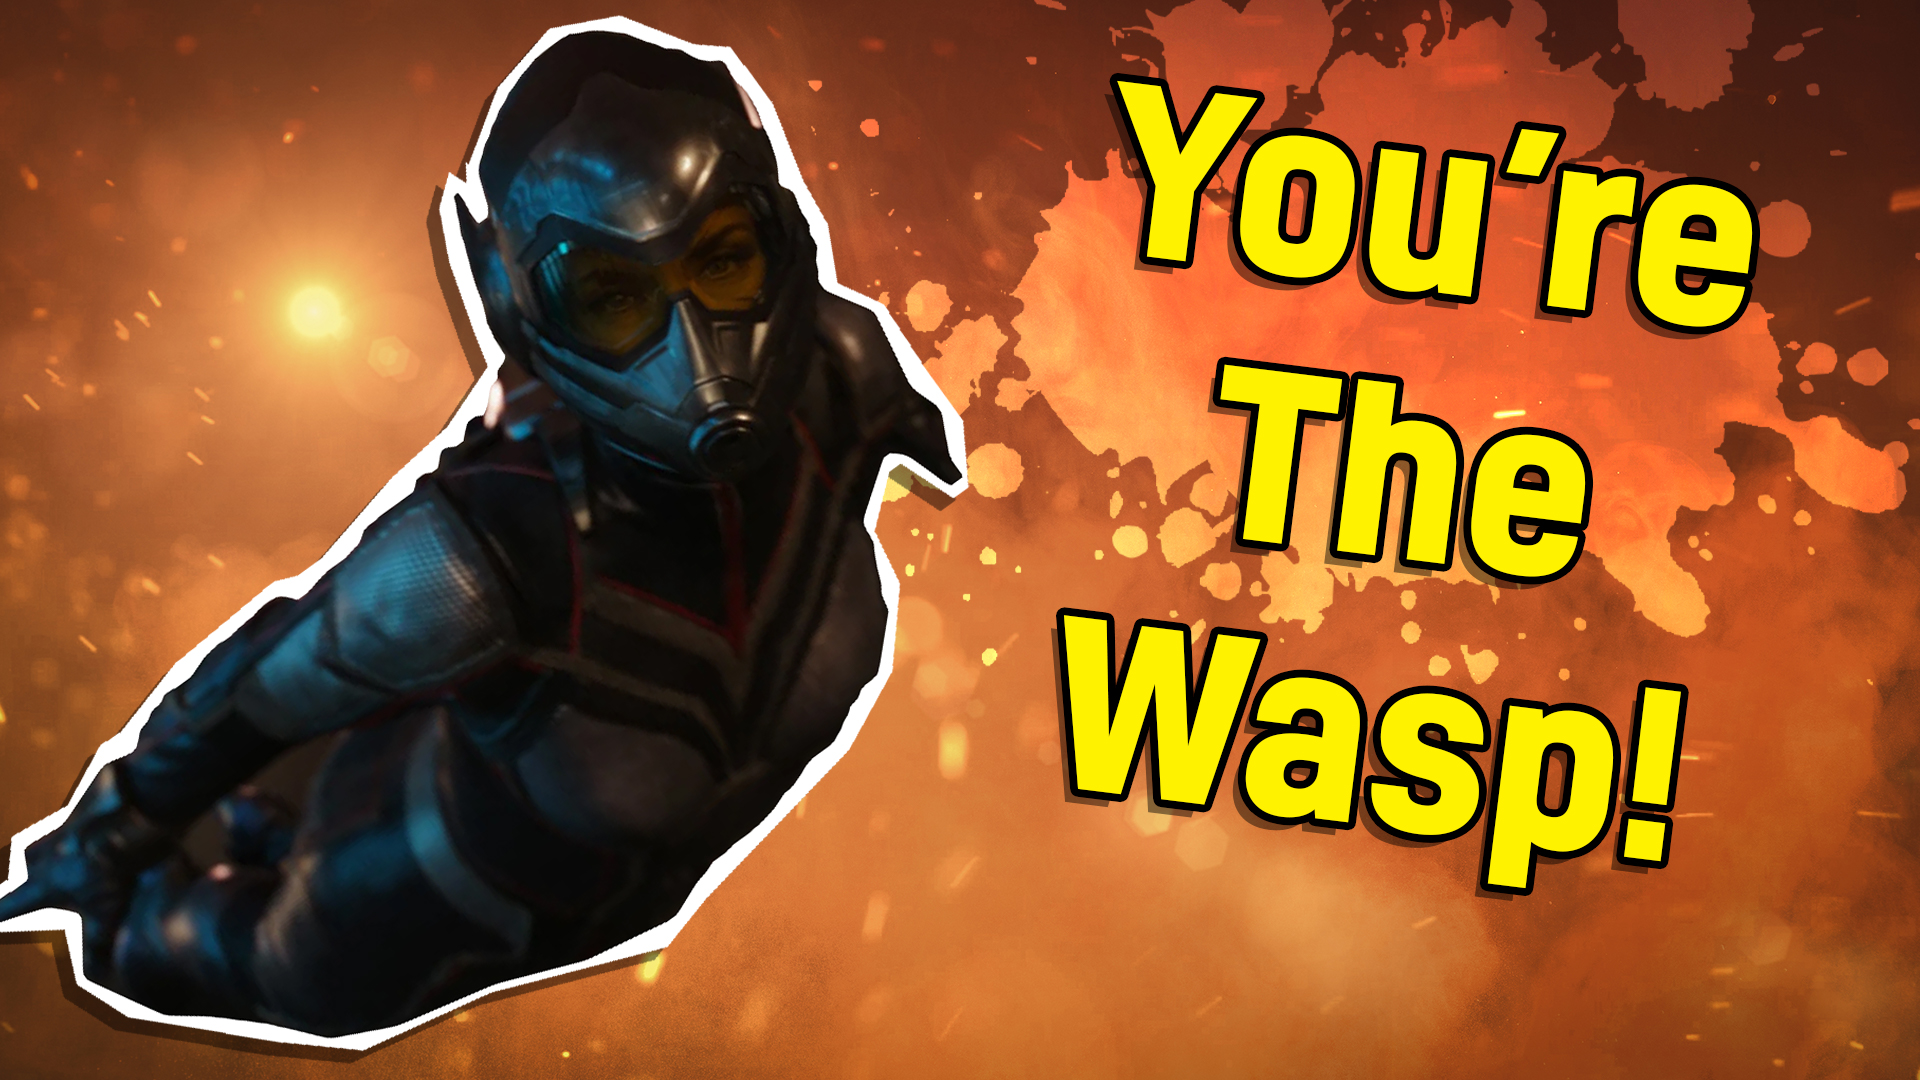 Result: You’re Wasp!